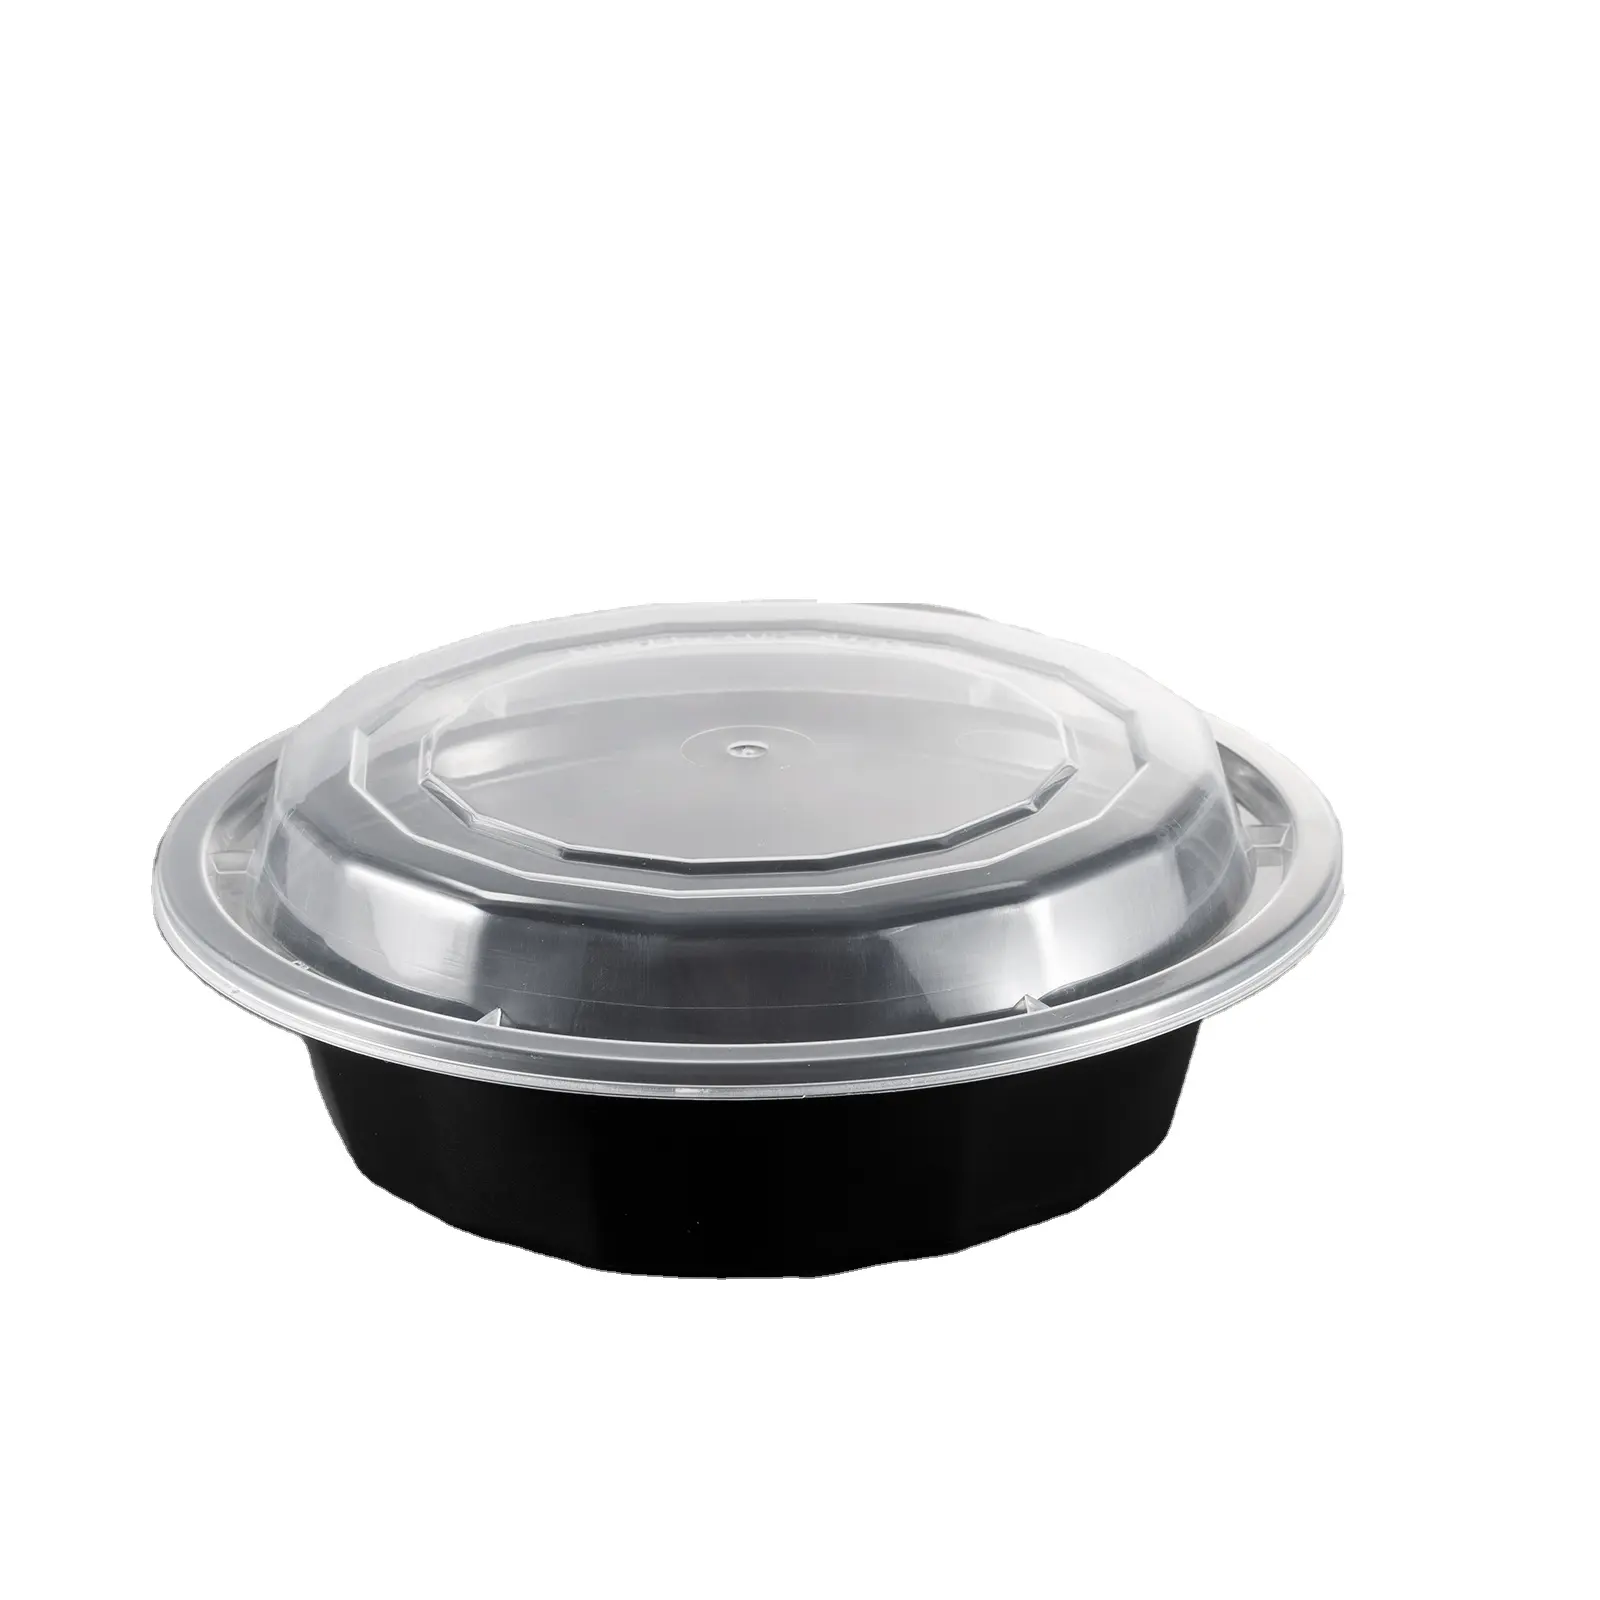 TD Black Round Microwavable Food Container with Clear Lid Lunch Bento Box